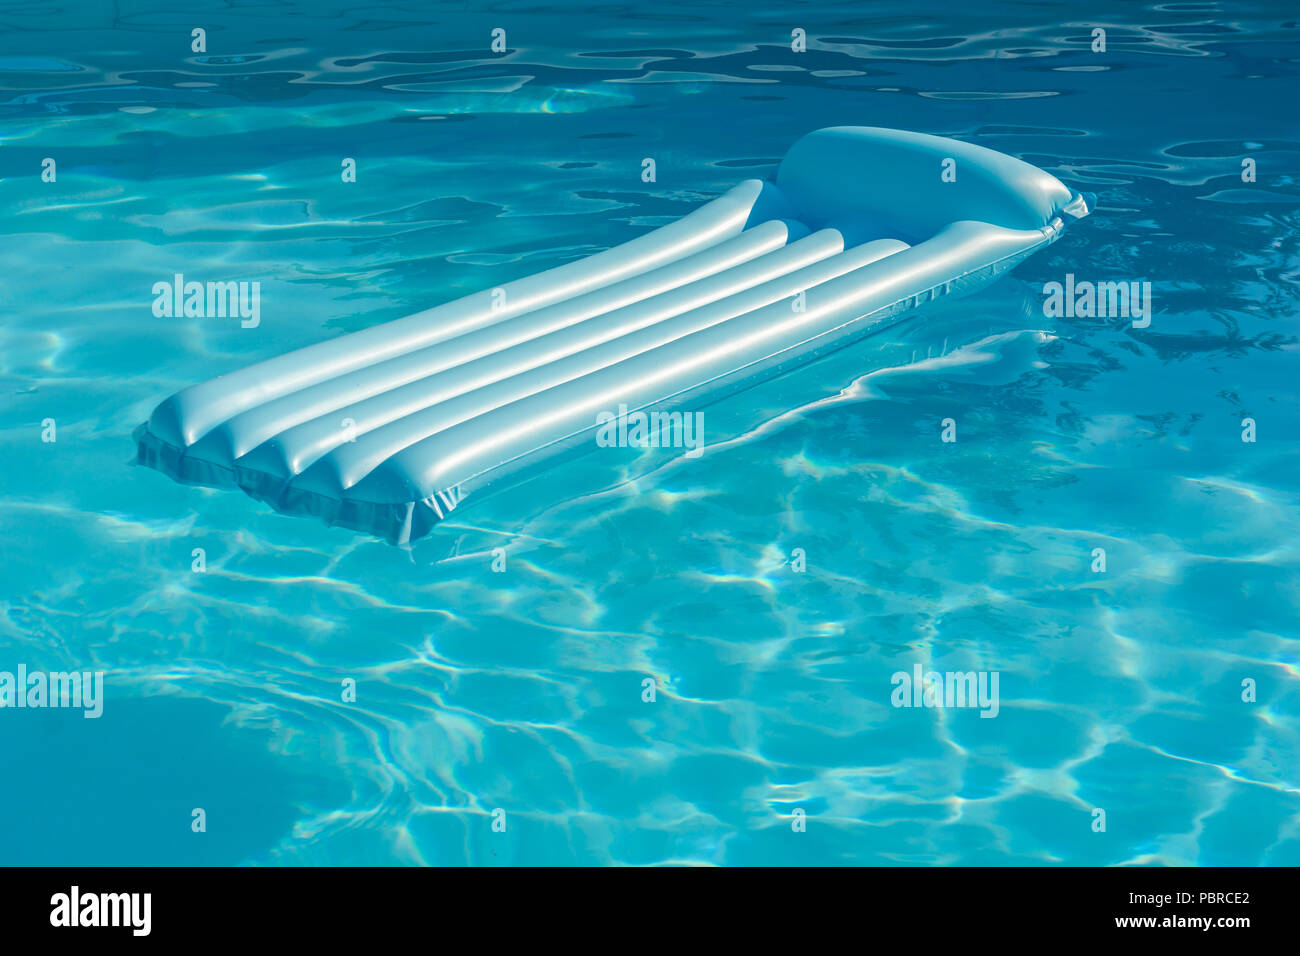 Blue inflatable mattress pool raft with sunlight floating over a swimming pool water. Summer and holidays concept. Stock Photo